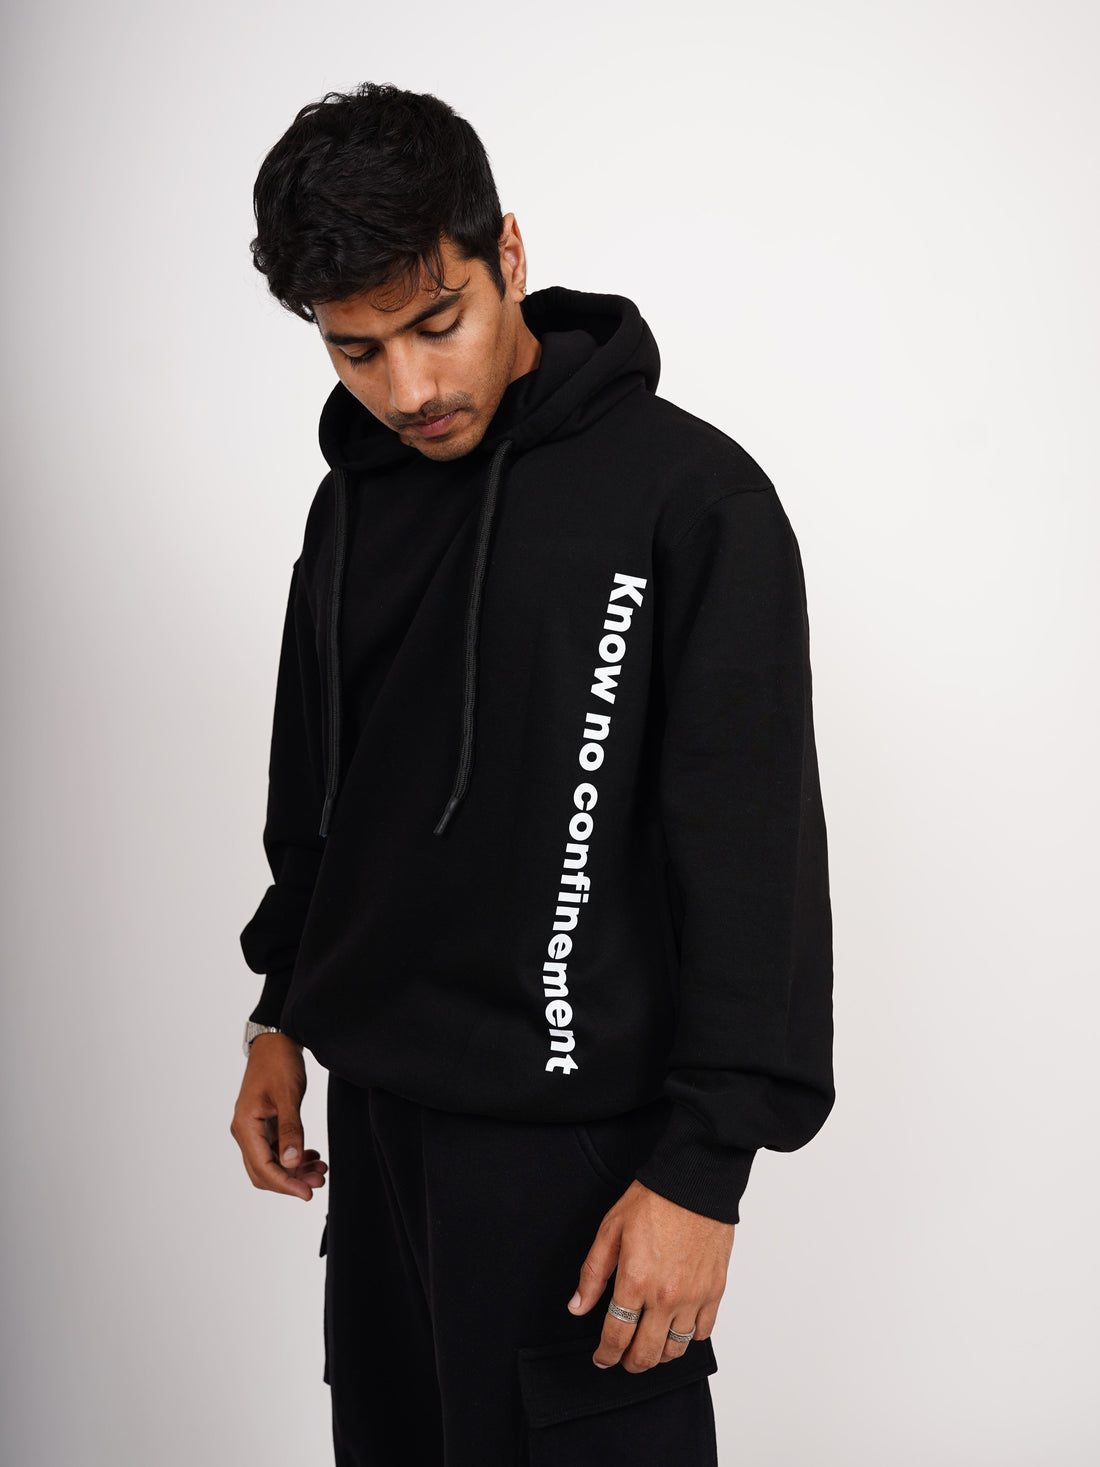 Non-Confinement - Heavyweight Baggy Unisex Hoodie